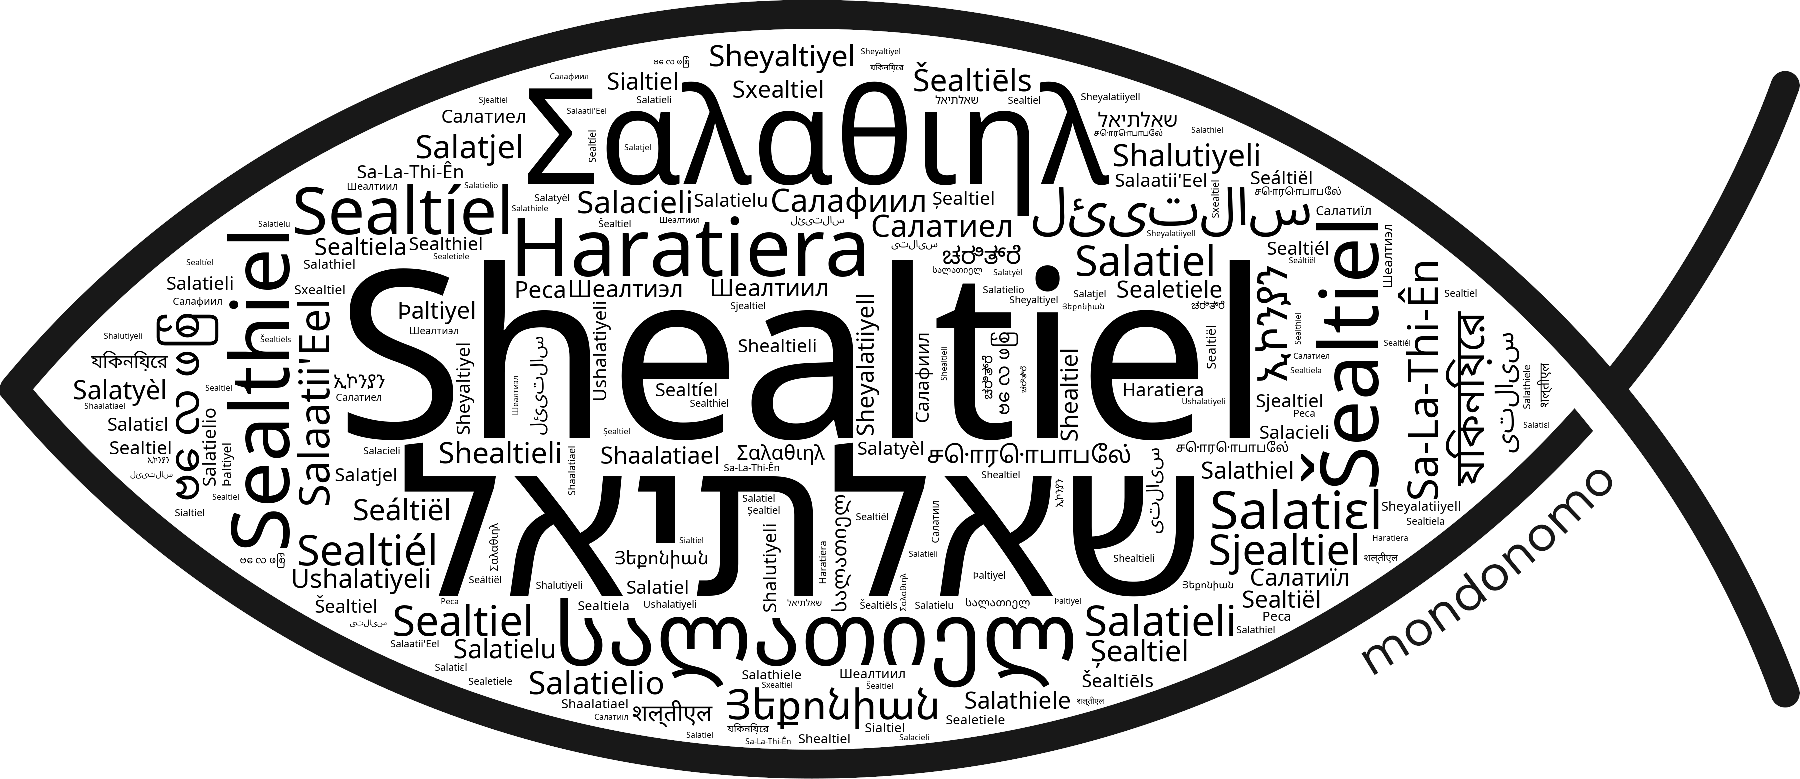 Name Shealtiel in the world's Bibles